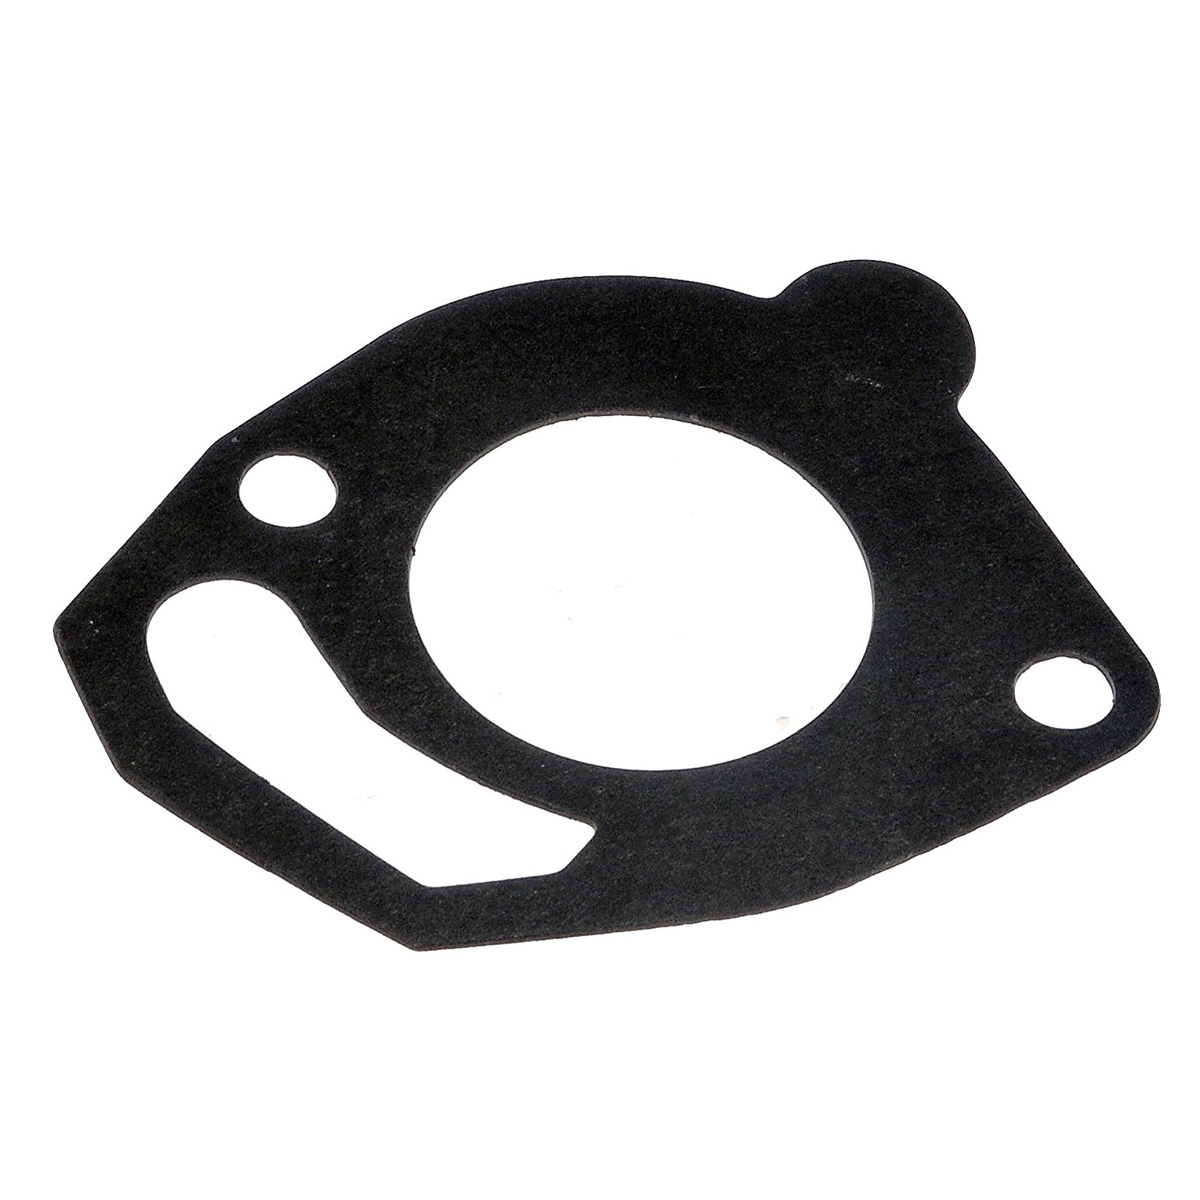 VAUXHALL AND OPEL ASTRAMAX Thermostat Gasket